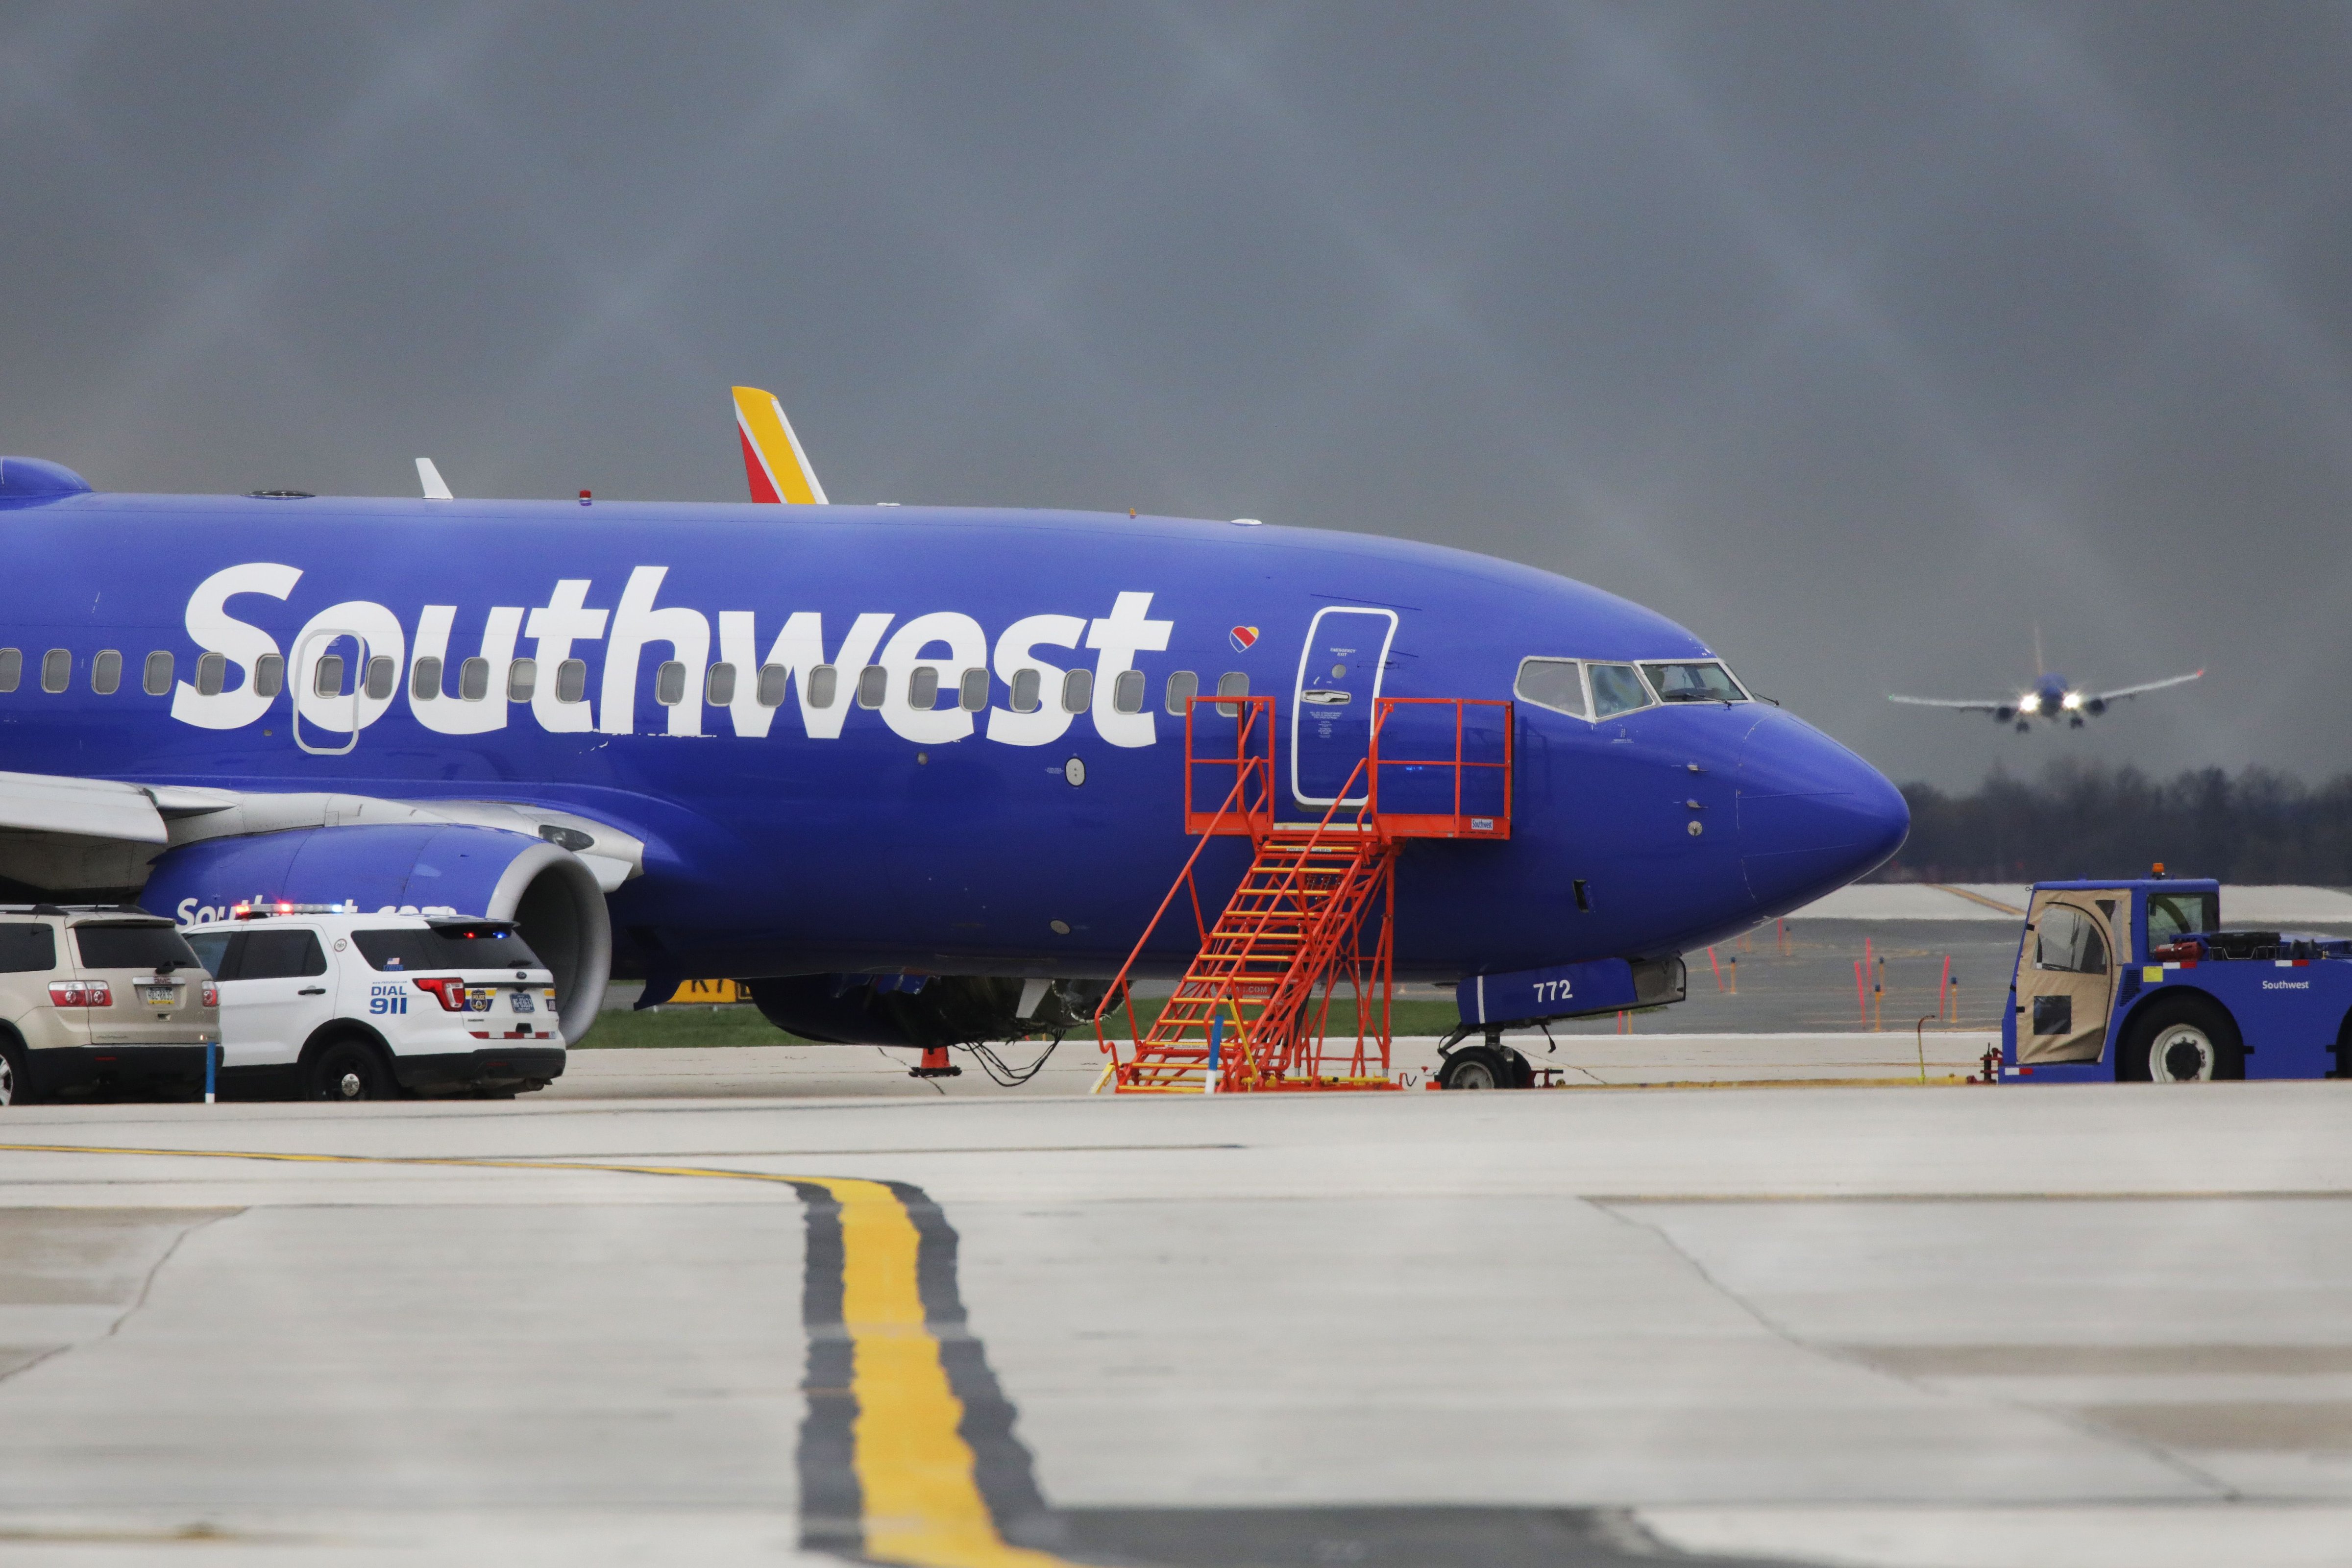 A Southwest Airlines jet sits on the runway at Philadelphia International Airport on April 17, 2018. (Dominick Reuter—AFP/Getty Images)